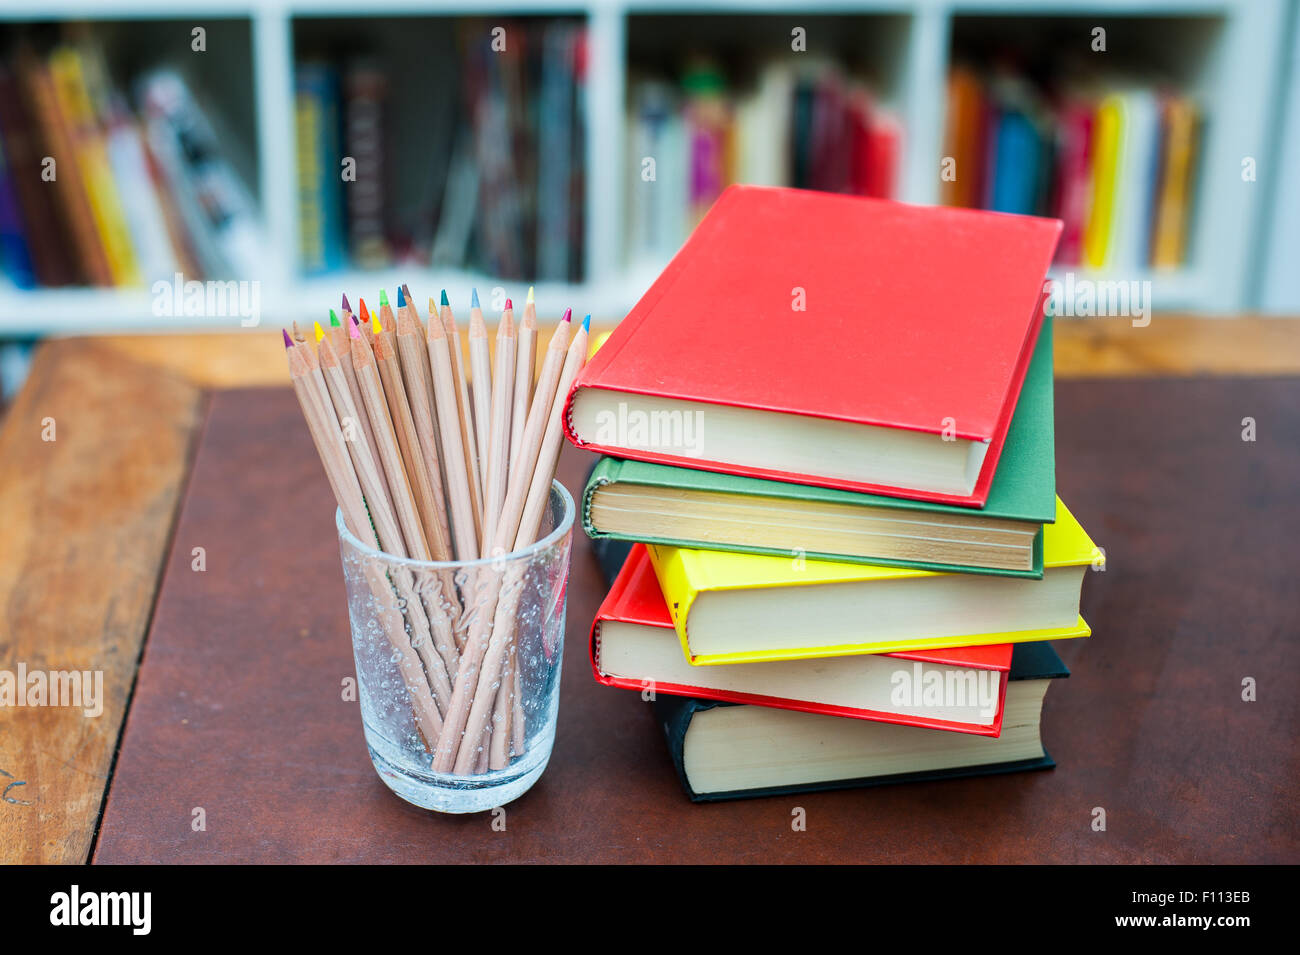 Colored Pencils In Glass Pen Holder With Pile Of Books With